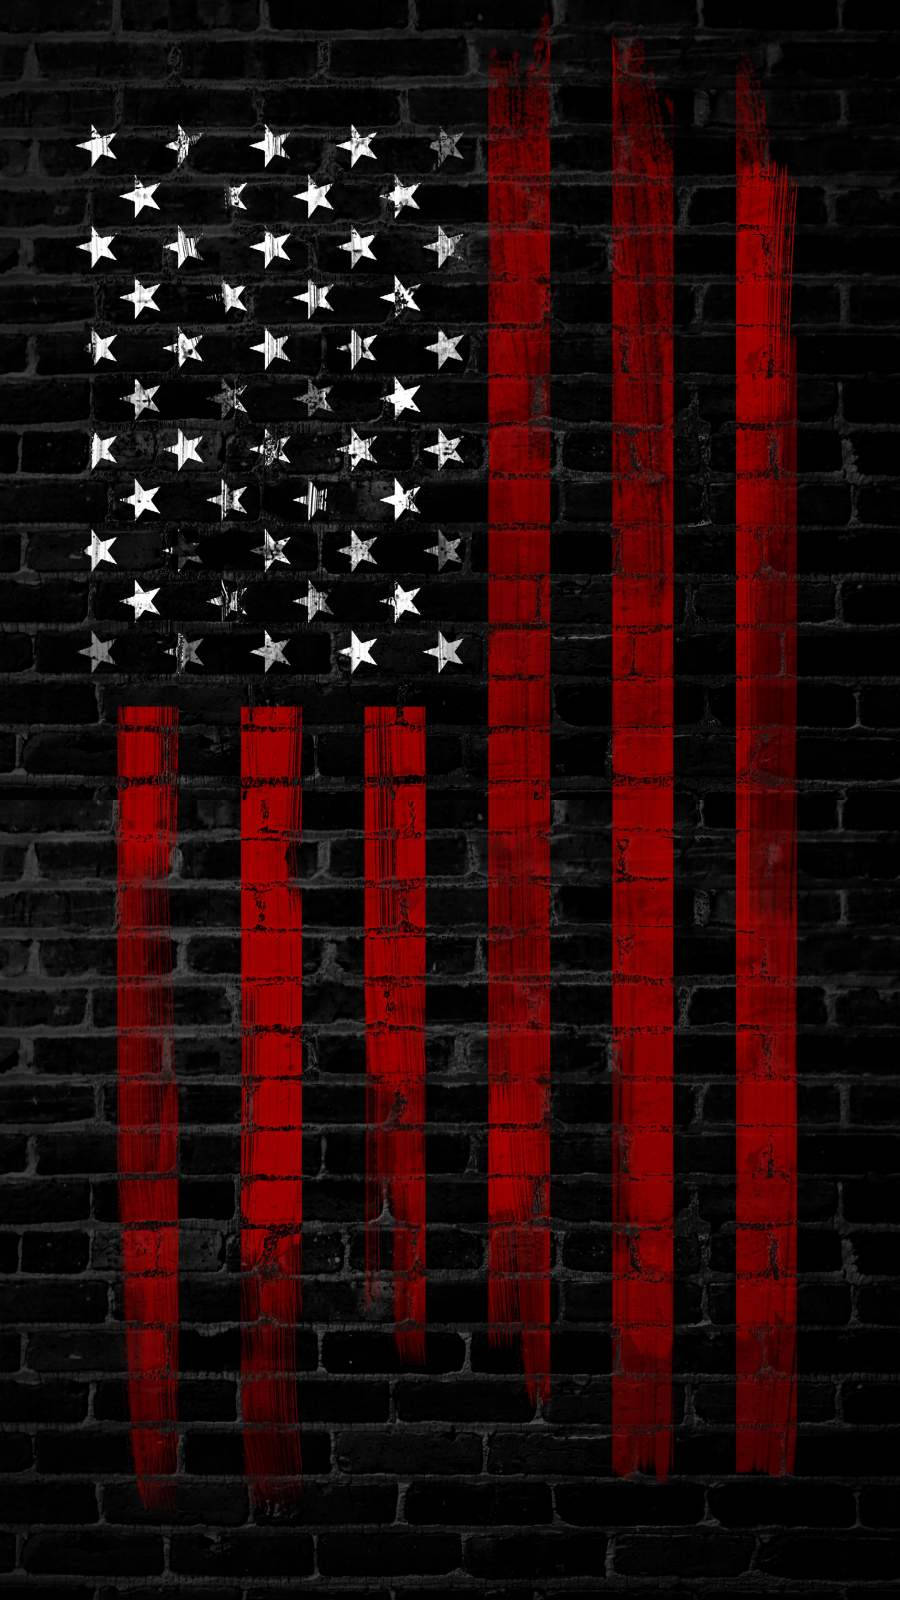 Brick Wall Painted With The Flag of America Iphone Wallpaper